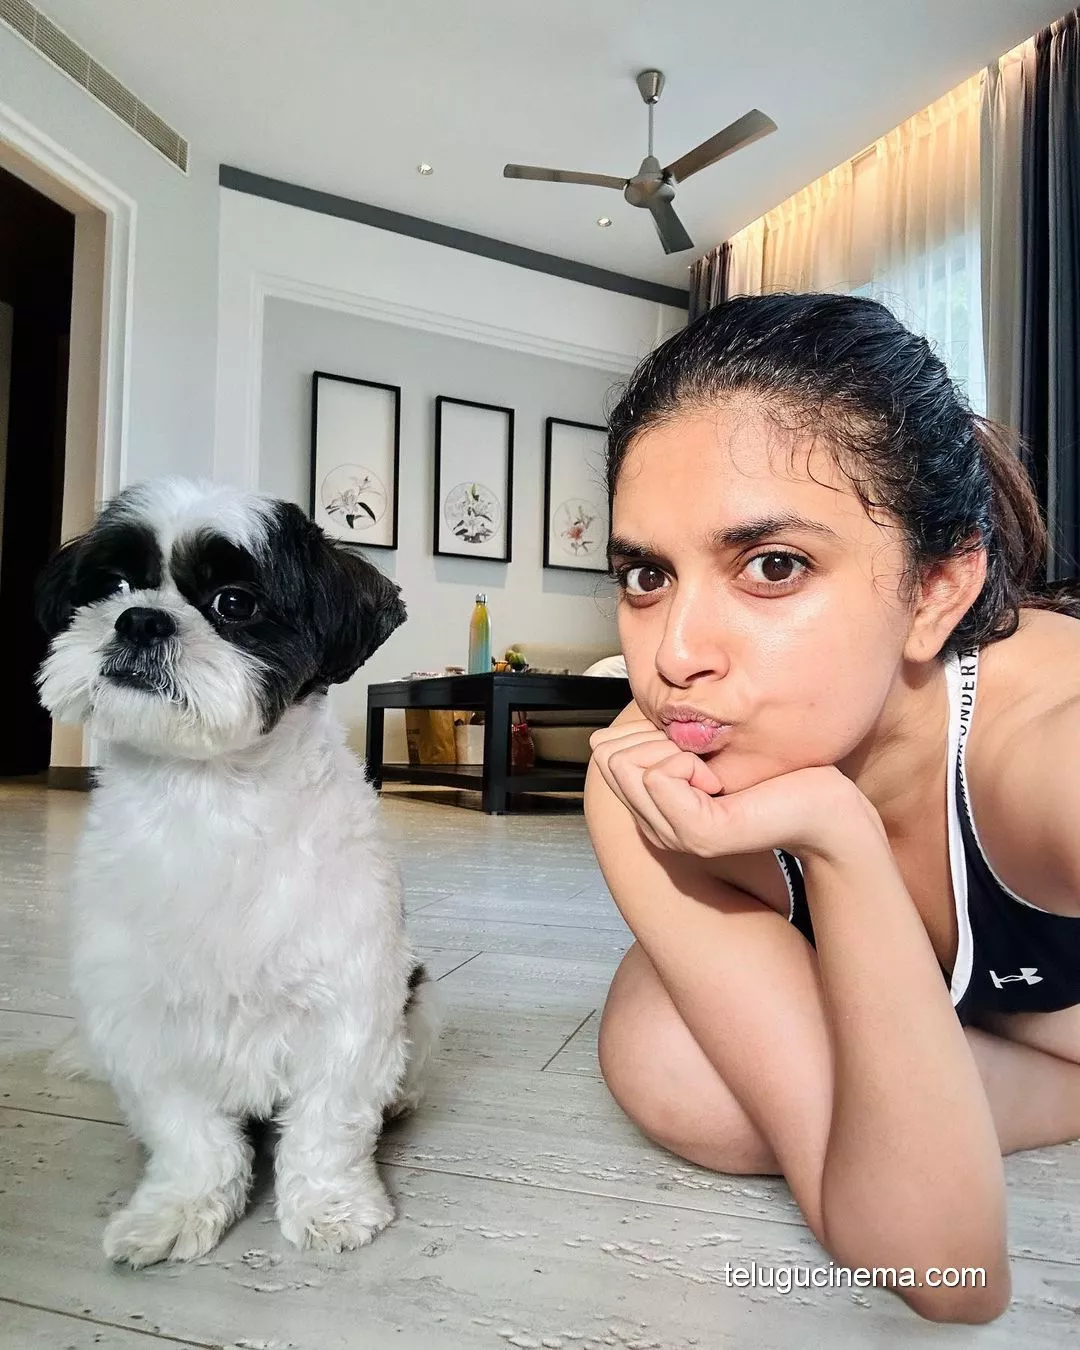 Keerthy Suresh playing with her pet dog